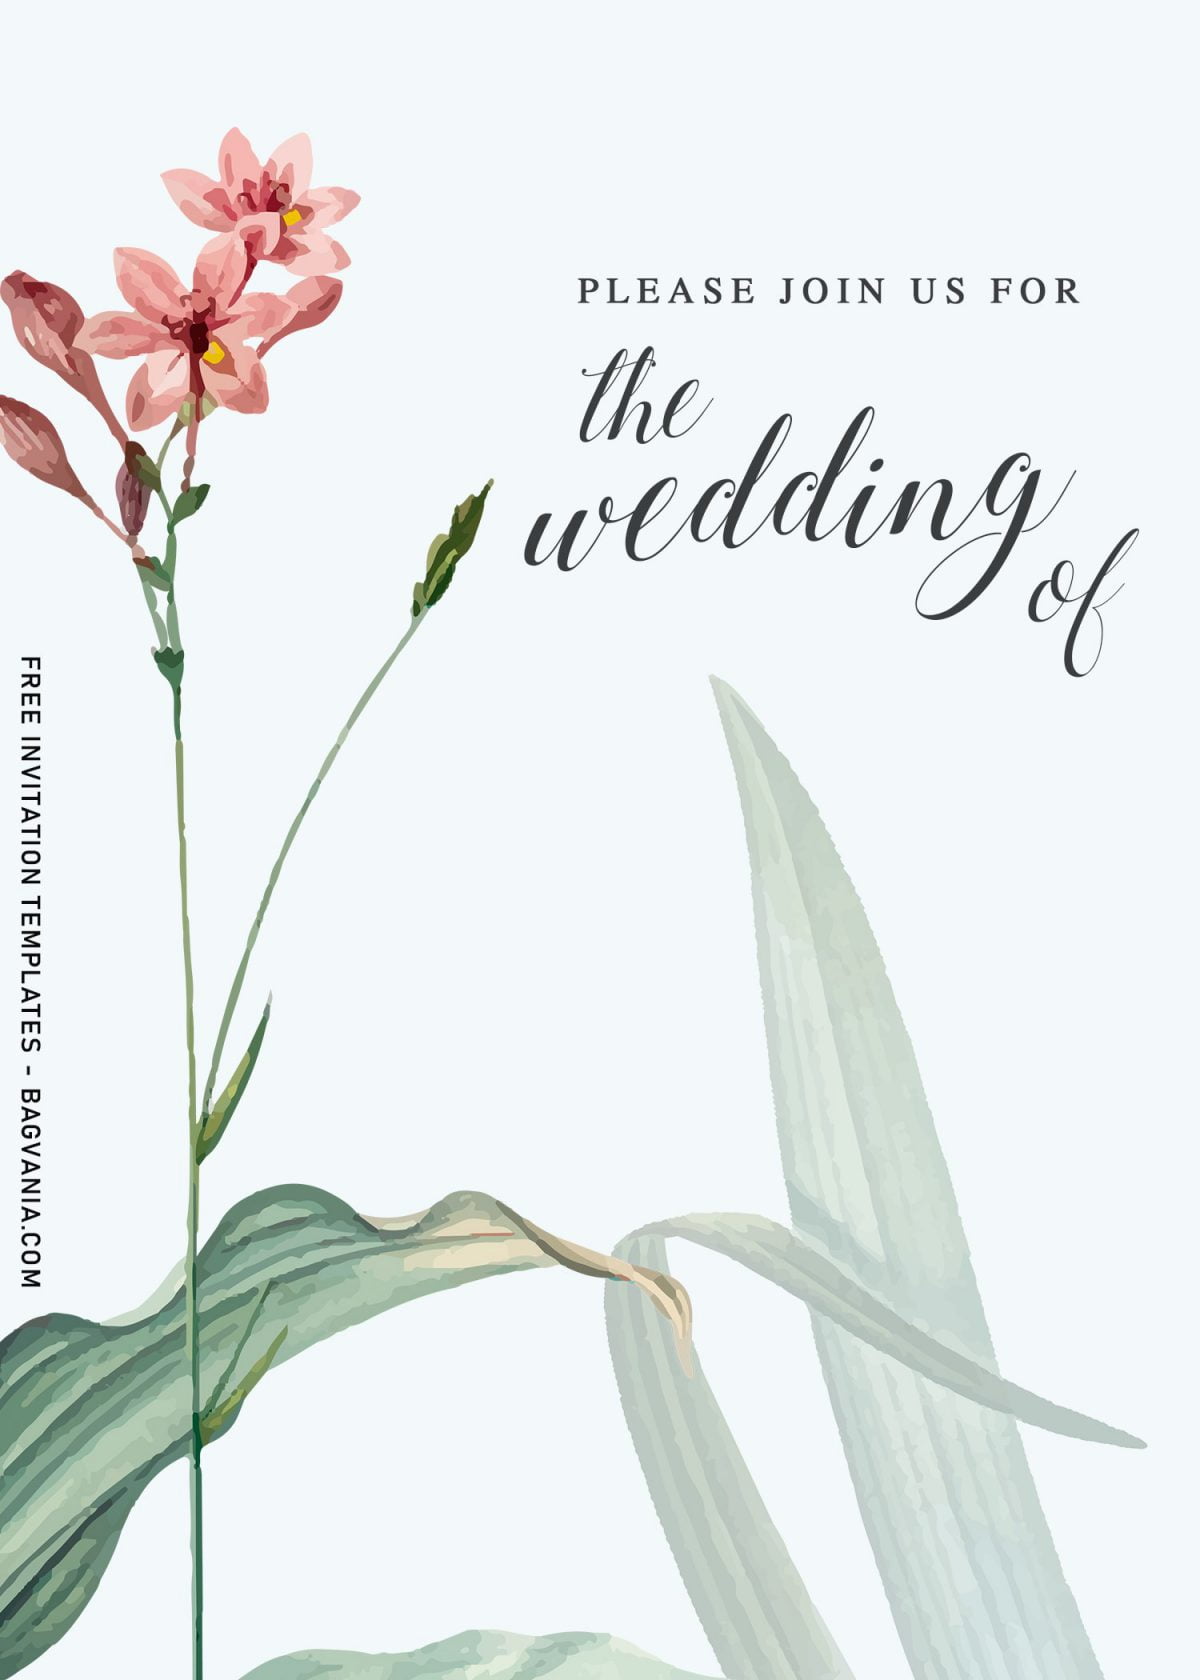 9+ Stunning Greenery Themed Wedding Invitation Templates and has Watercolor flowers